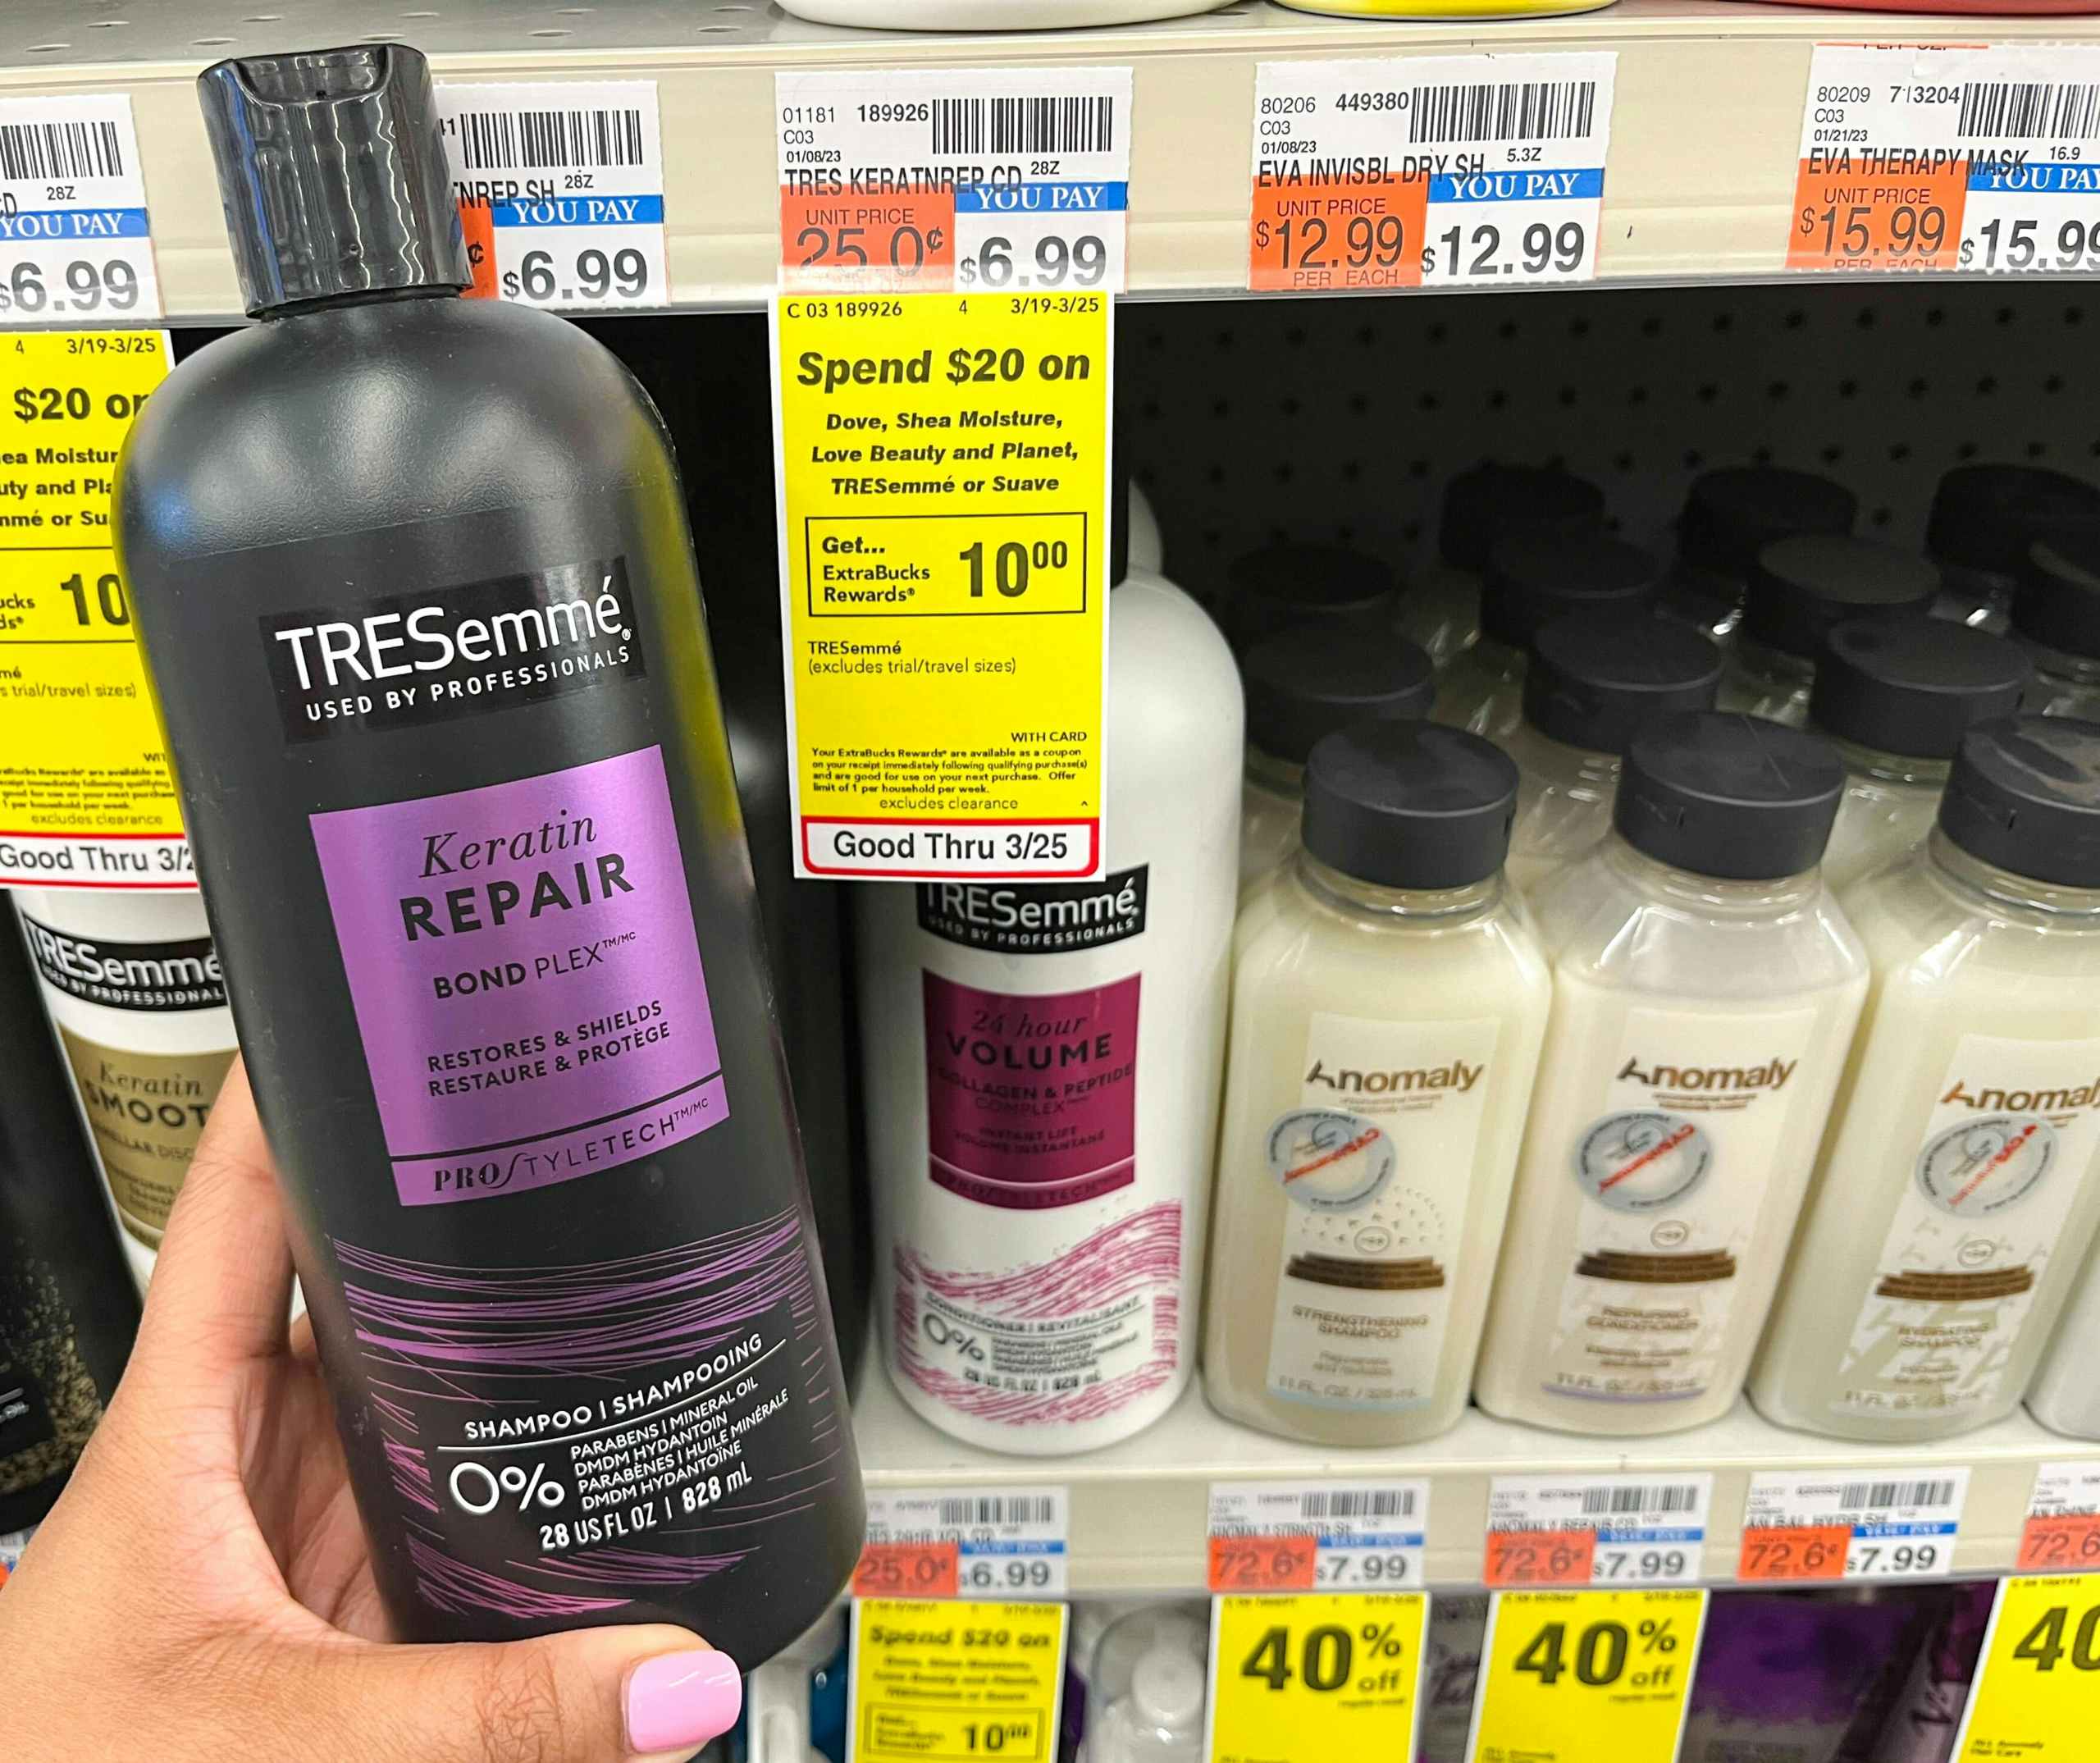 hand holding bottle of Tresemme shampoo next to sales tag